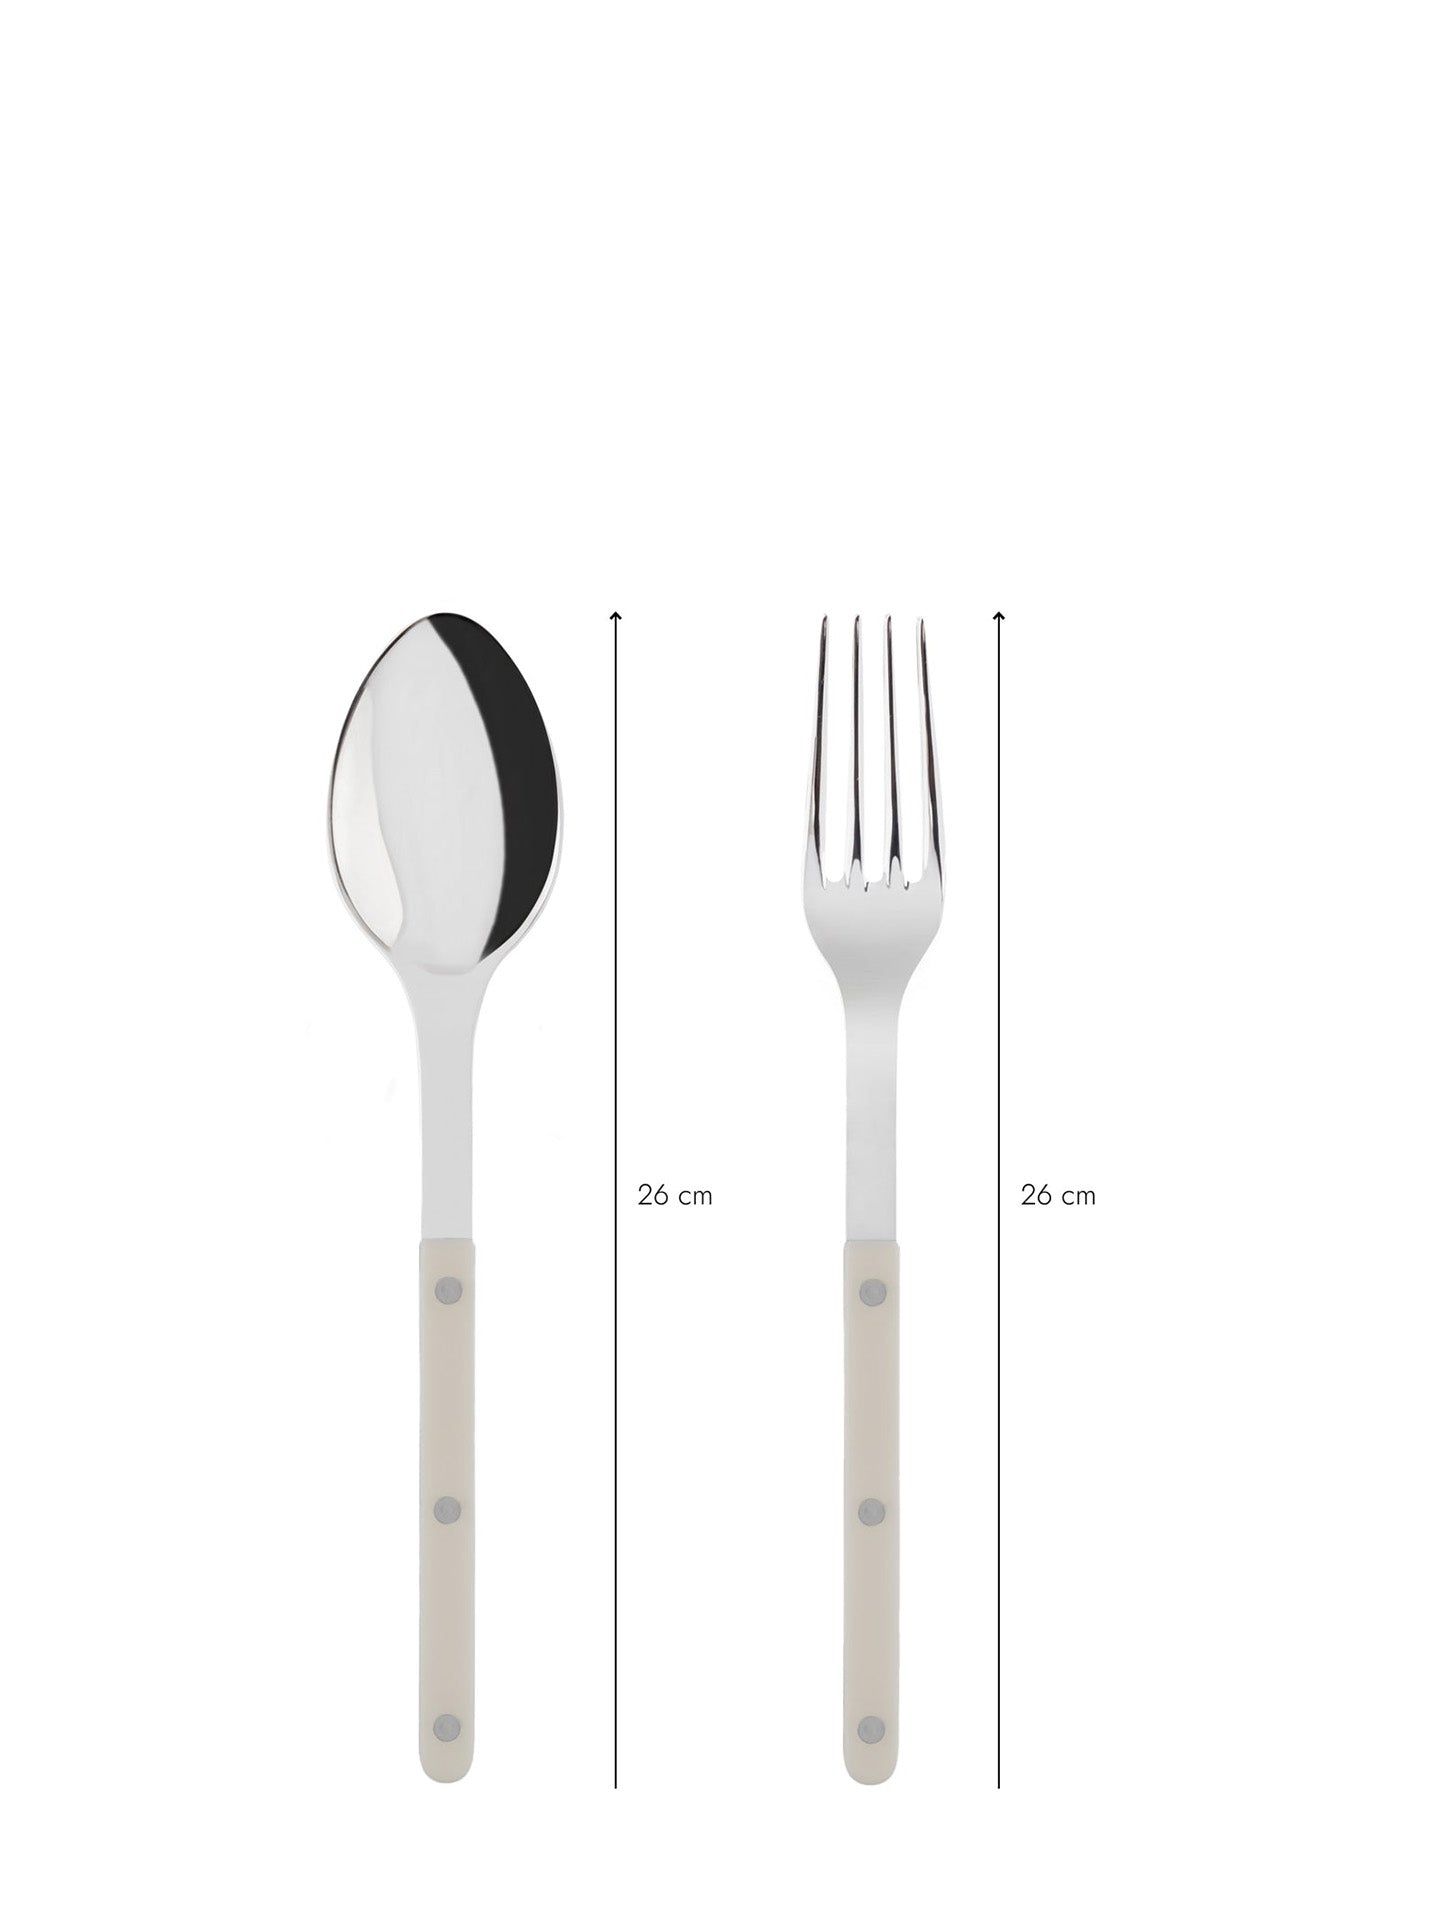 Size chart for the Bistrot servers: the fork and scooping spoon are 26 cm tall.